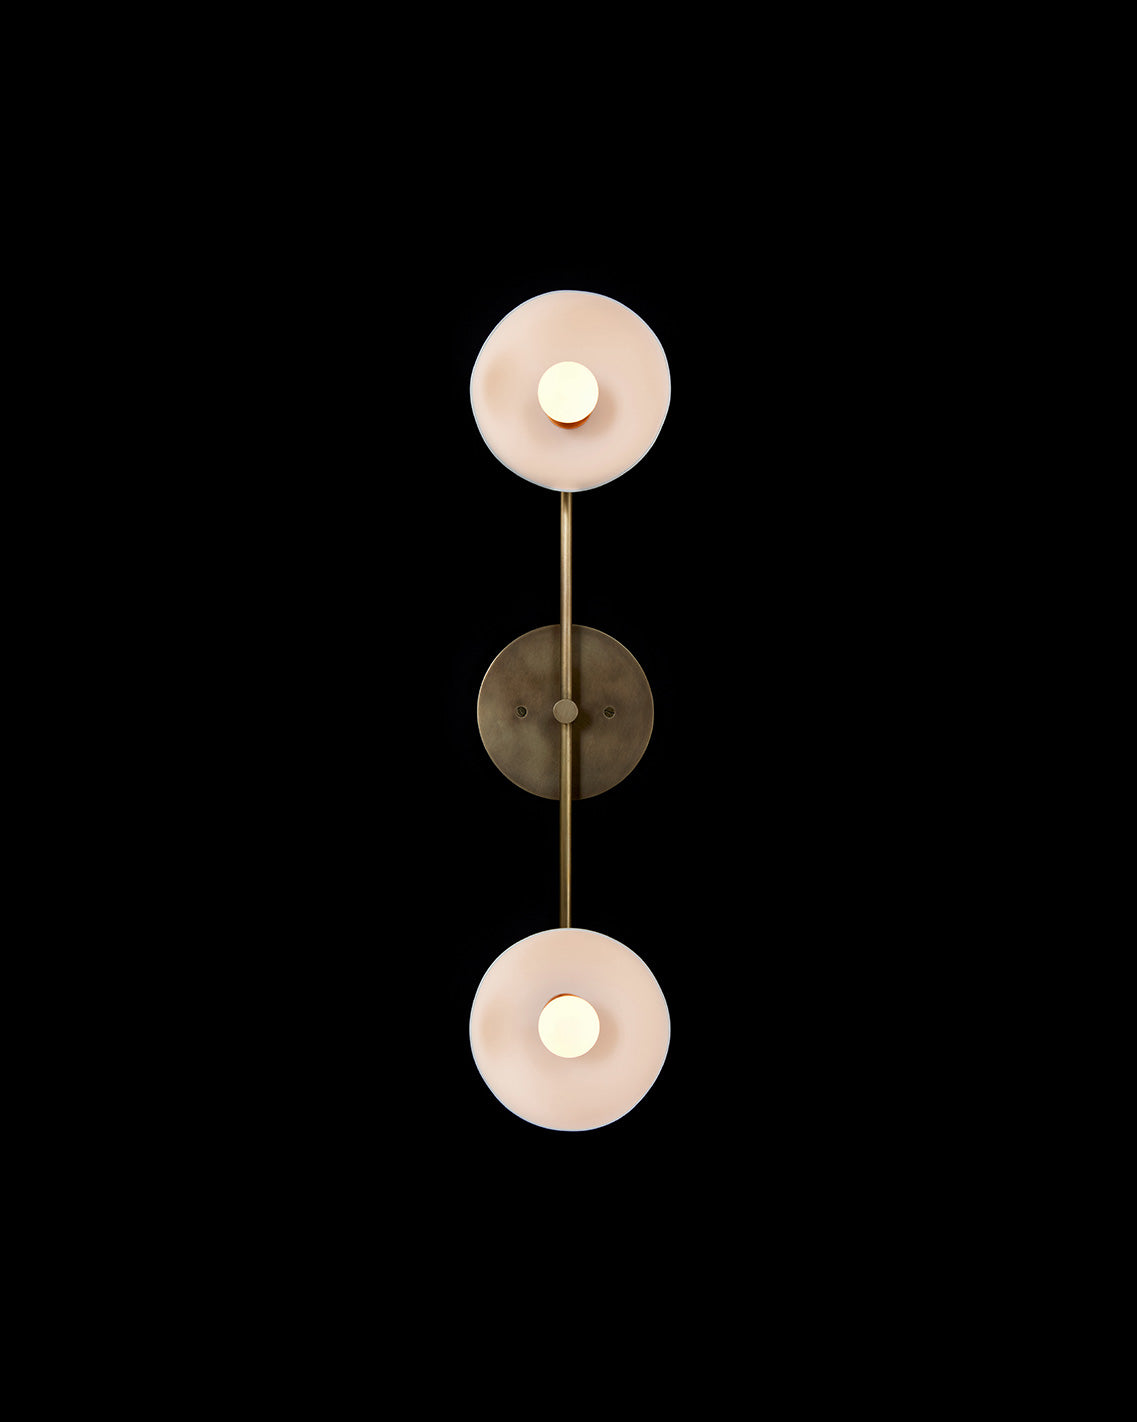 TRAPEZE : 2 surface light in Aged Brass finish with Porcelain bowls, mounted vertically to a black wall. 